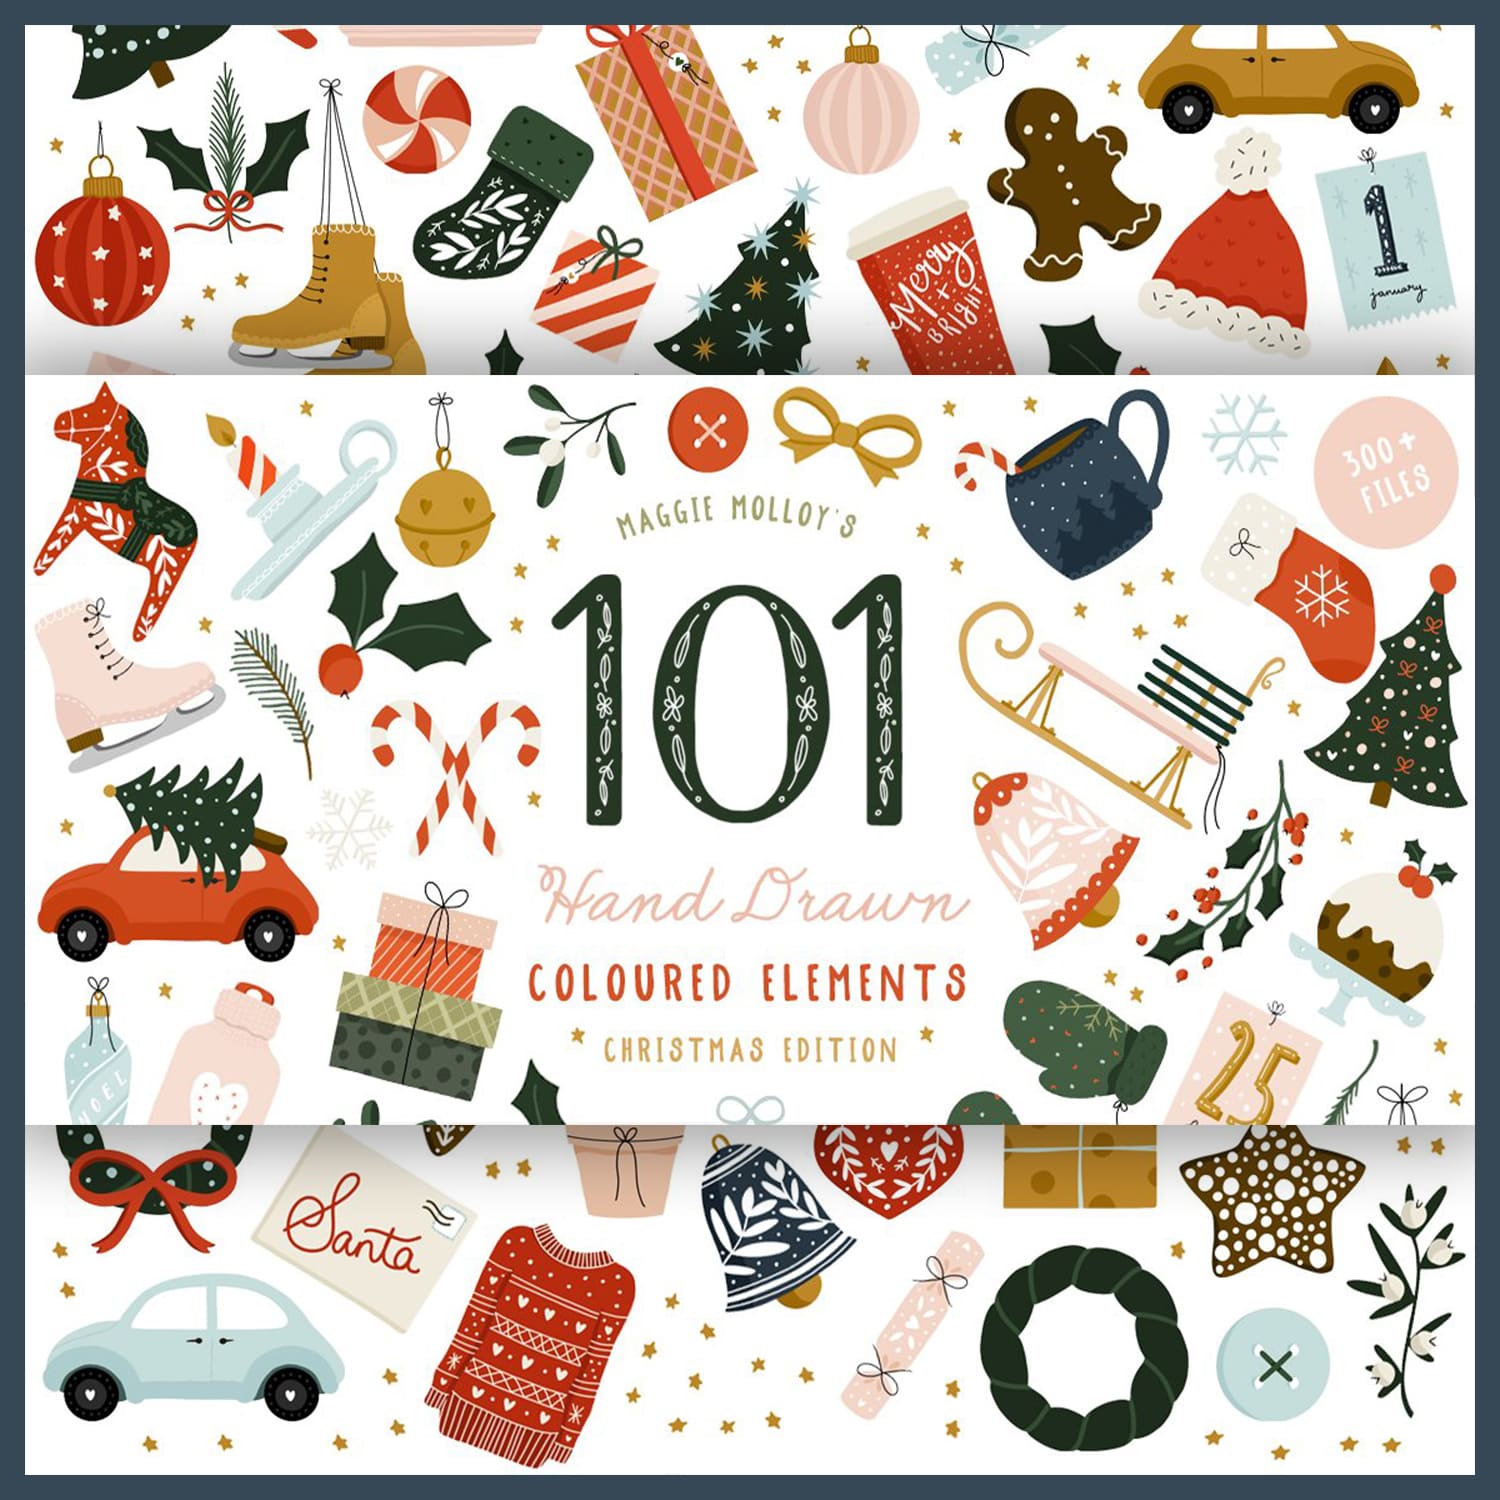 Maggie Molloy's, 101 Hand Drawn Coloured Elements, Christmas Edition.